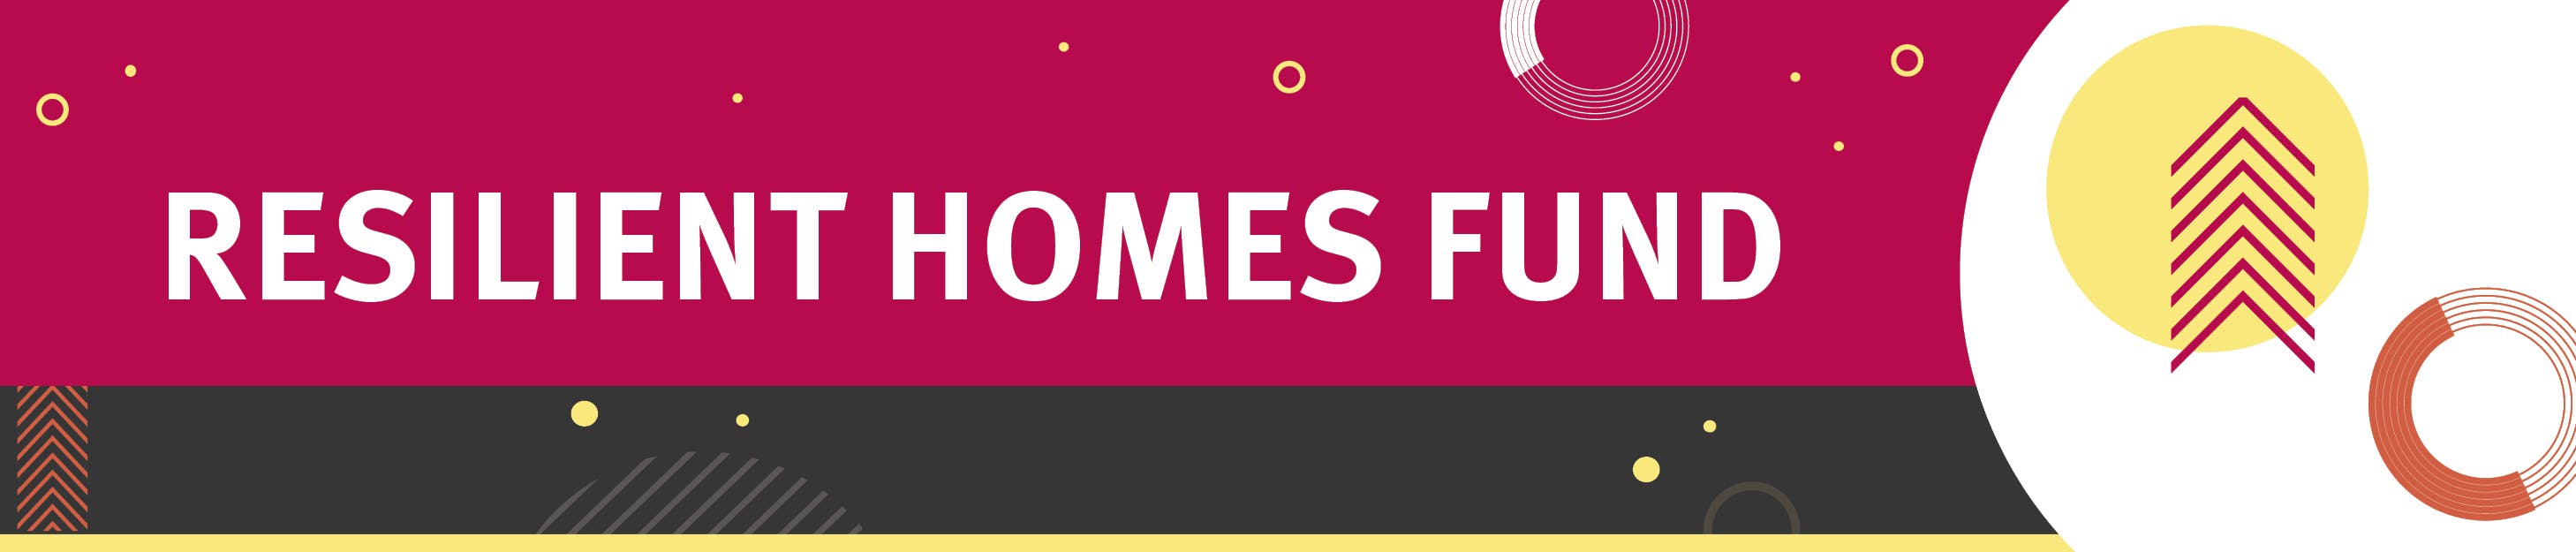 resilient homes fund banner